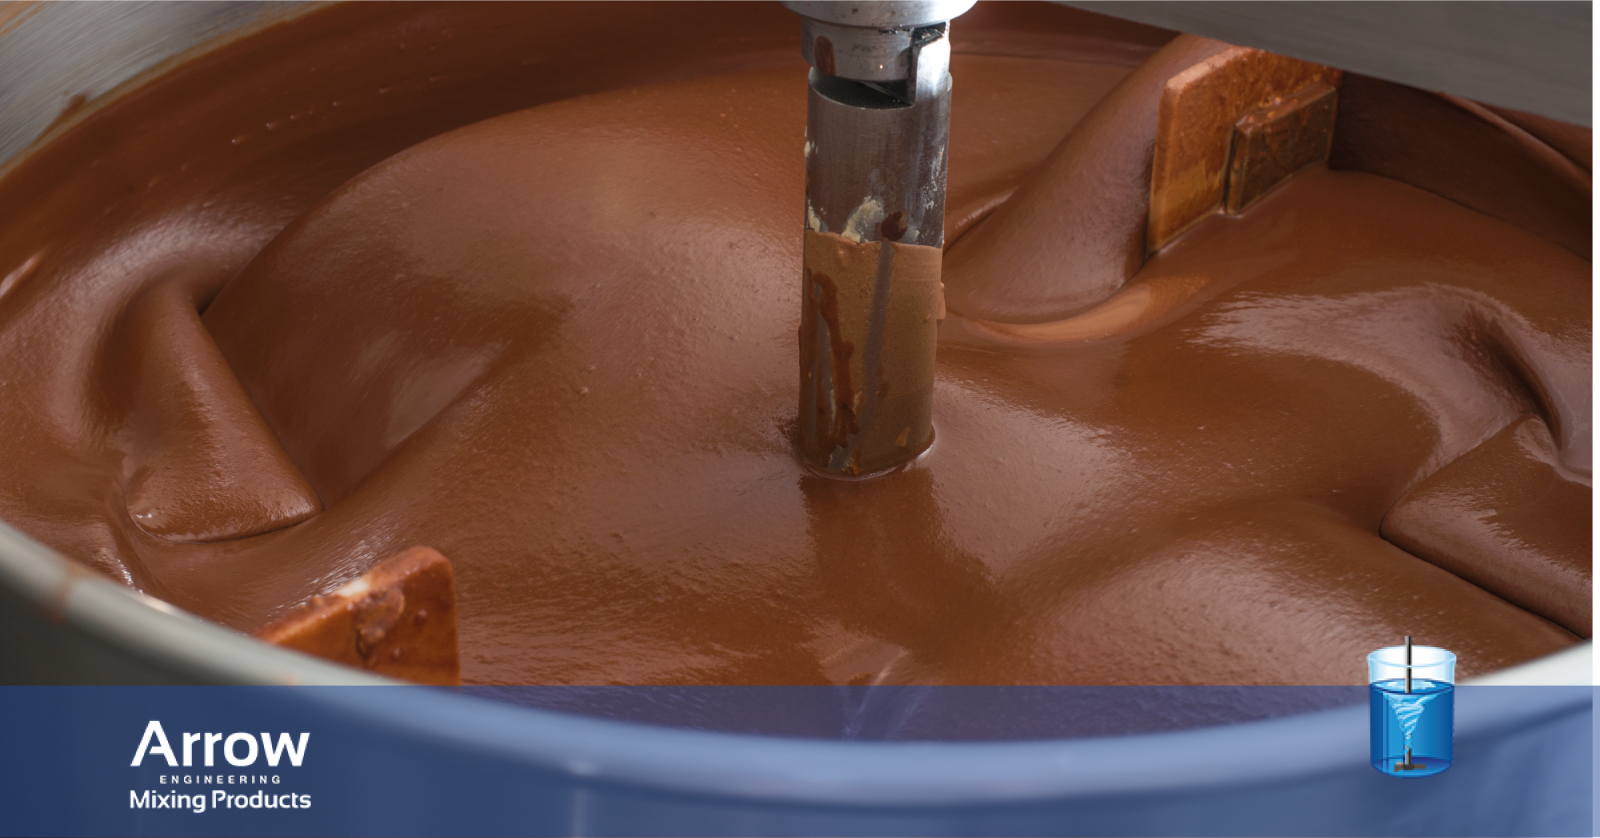 This is How Arrow Mixing Products Makes Chocolate Processing Easy